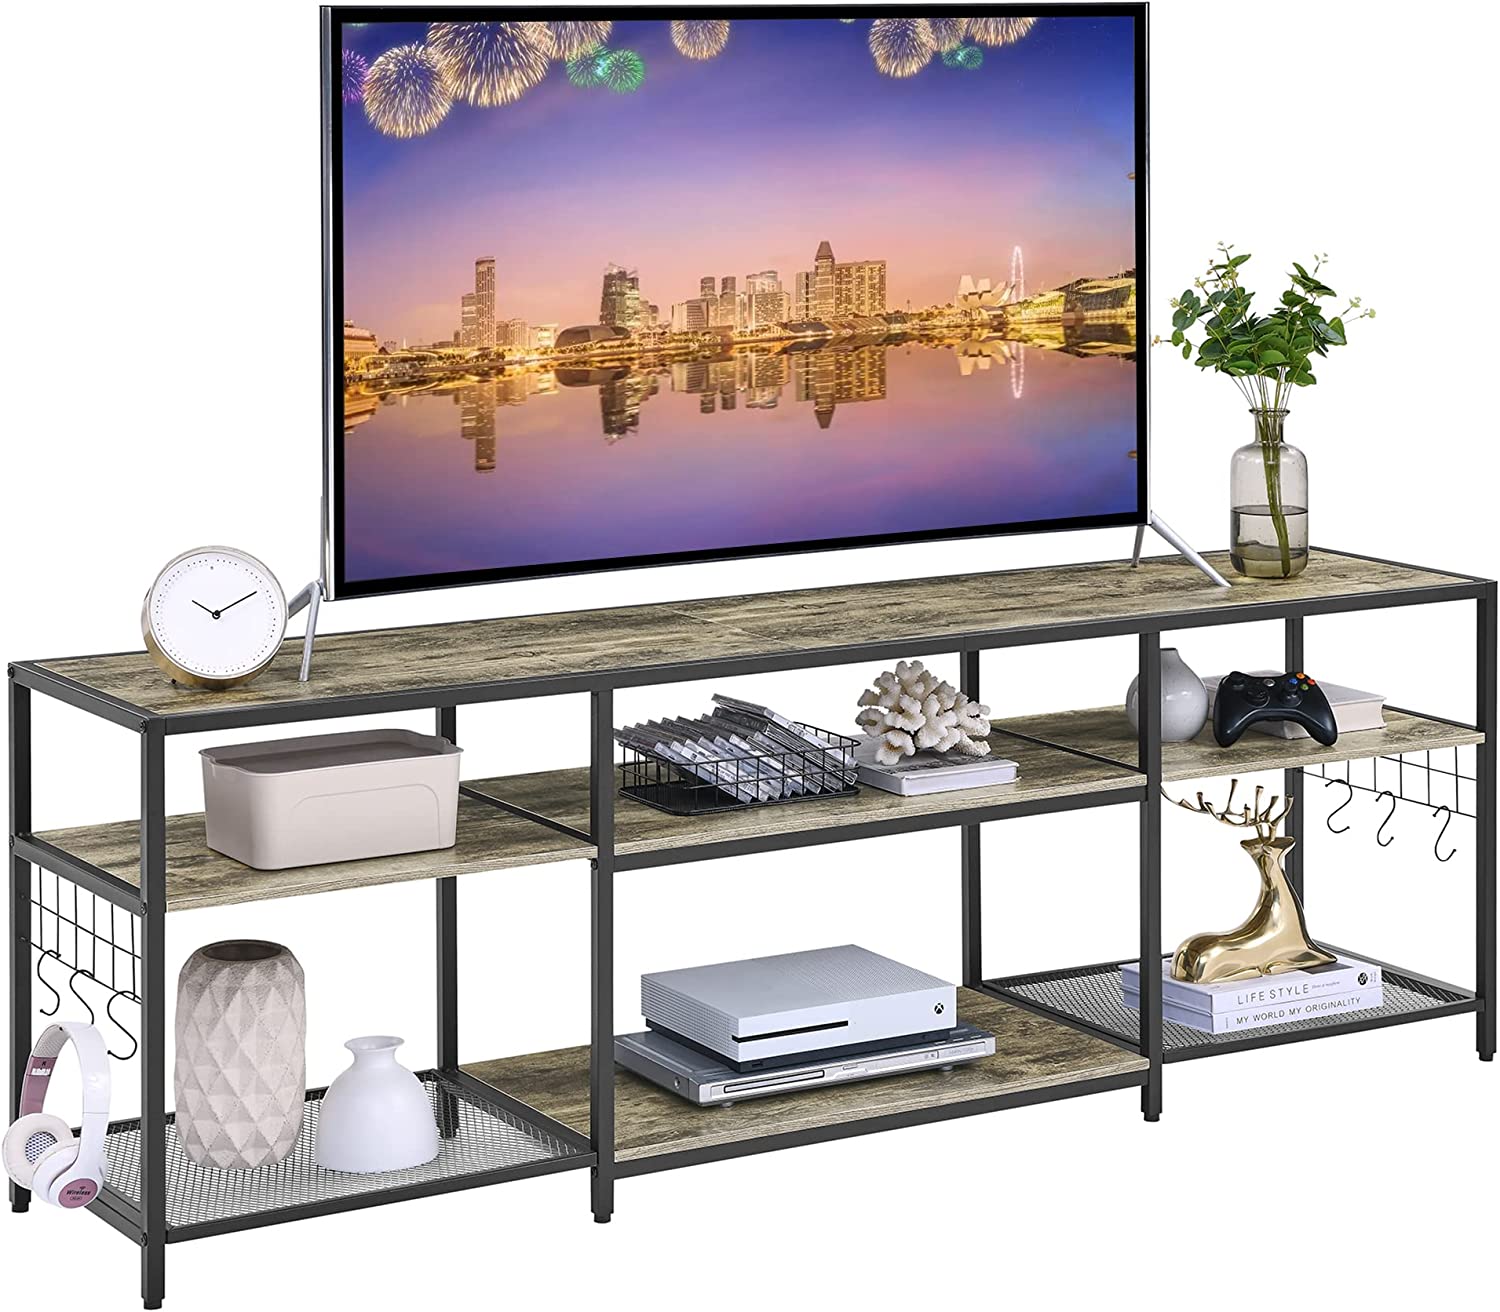 VECELO TV Stand Entertainment Center Media Console with 3-Tier Open Storage Shelves, Cabinet Table for Living Room Brown